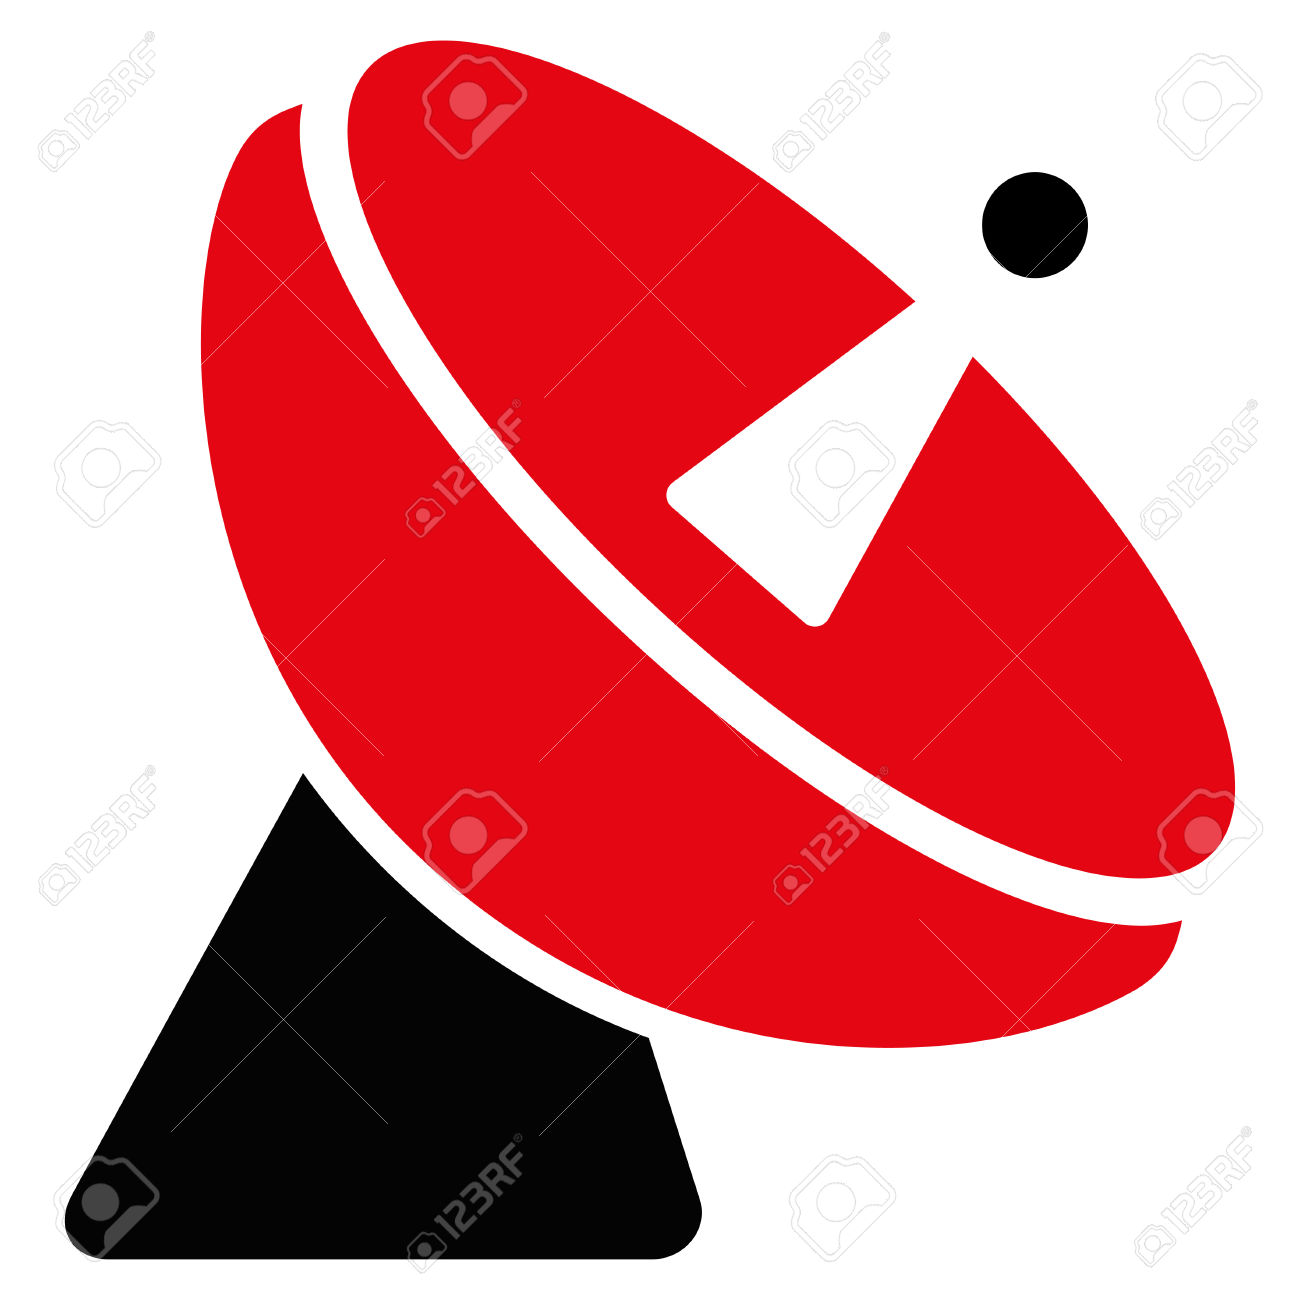 Radio Telescope Vector Icon. Style Is Flat Symbol, Rounded Angles.